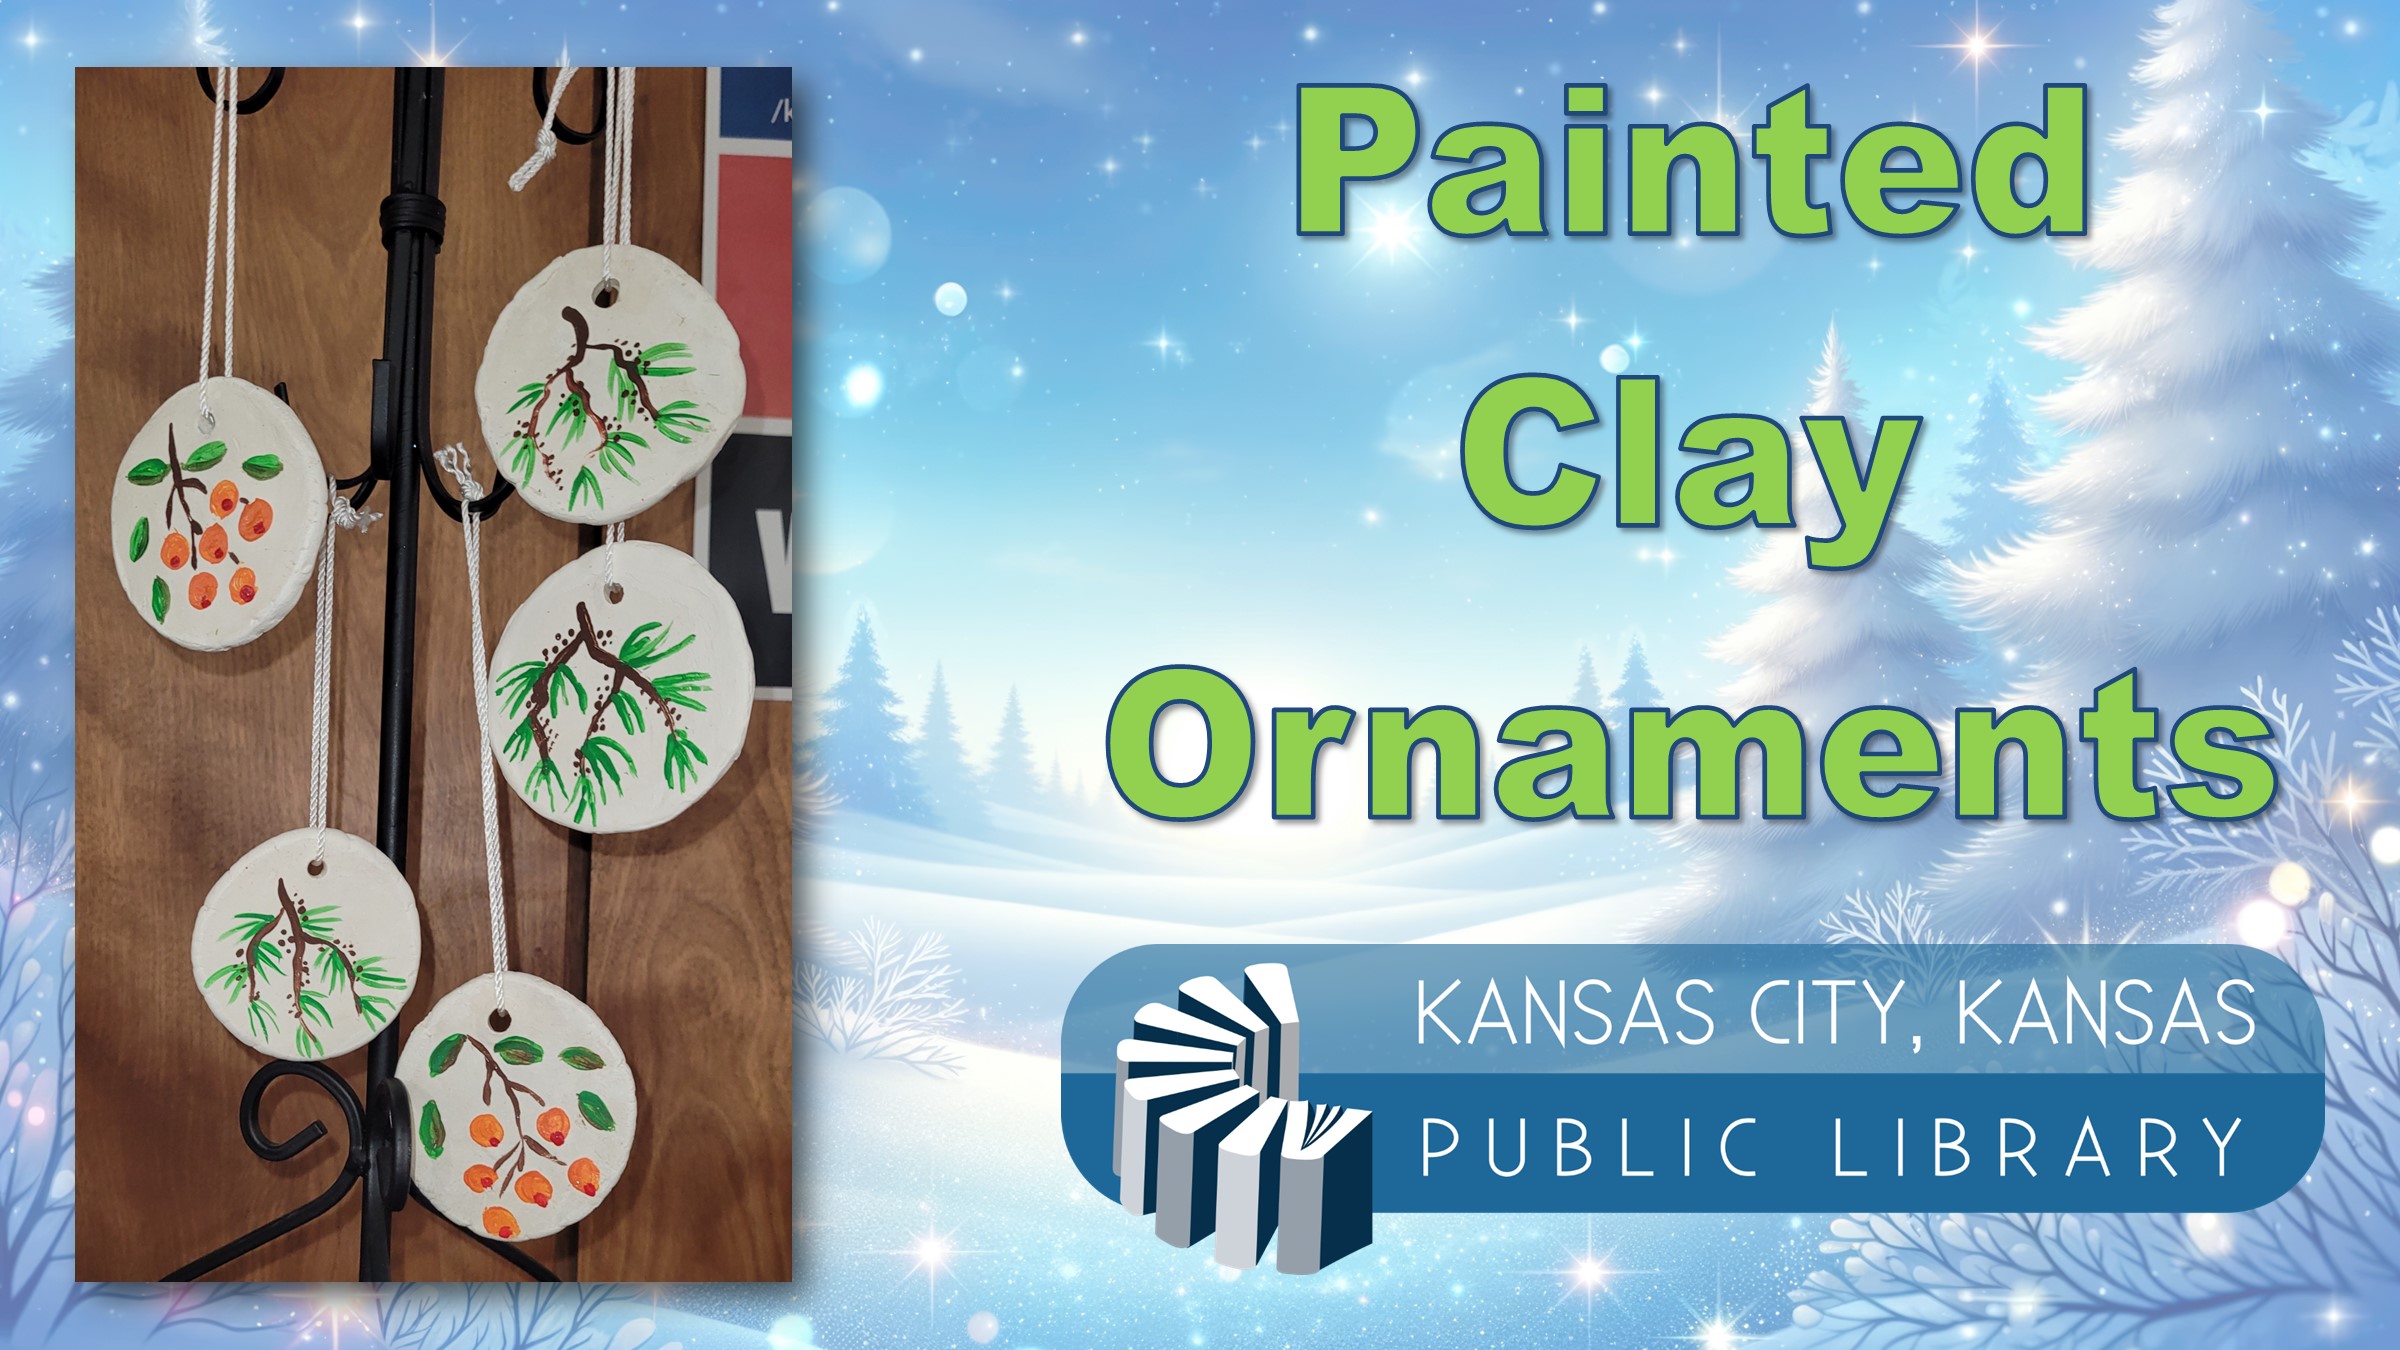 image painted clay ornaments, title and library logo on a snowy background